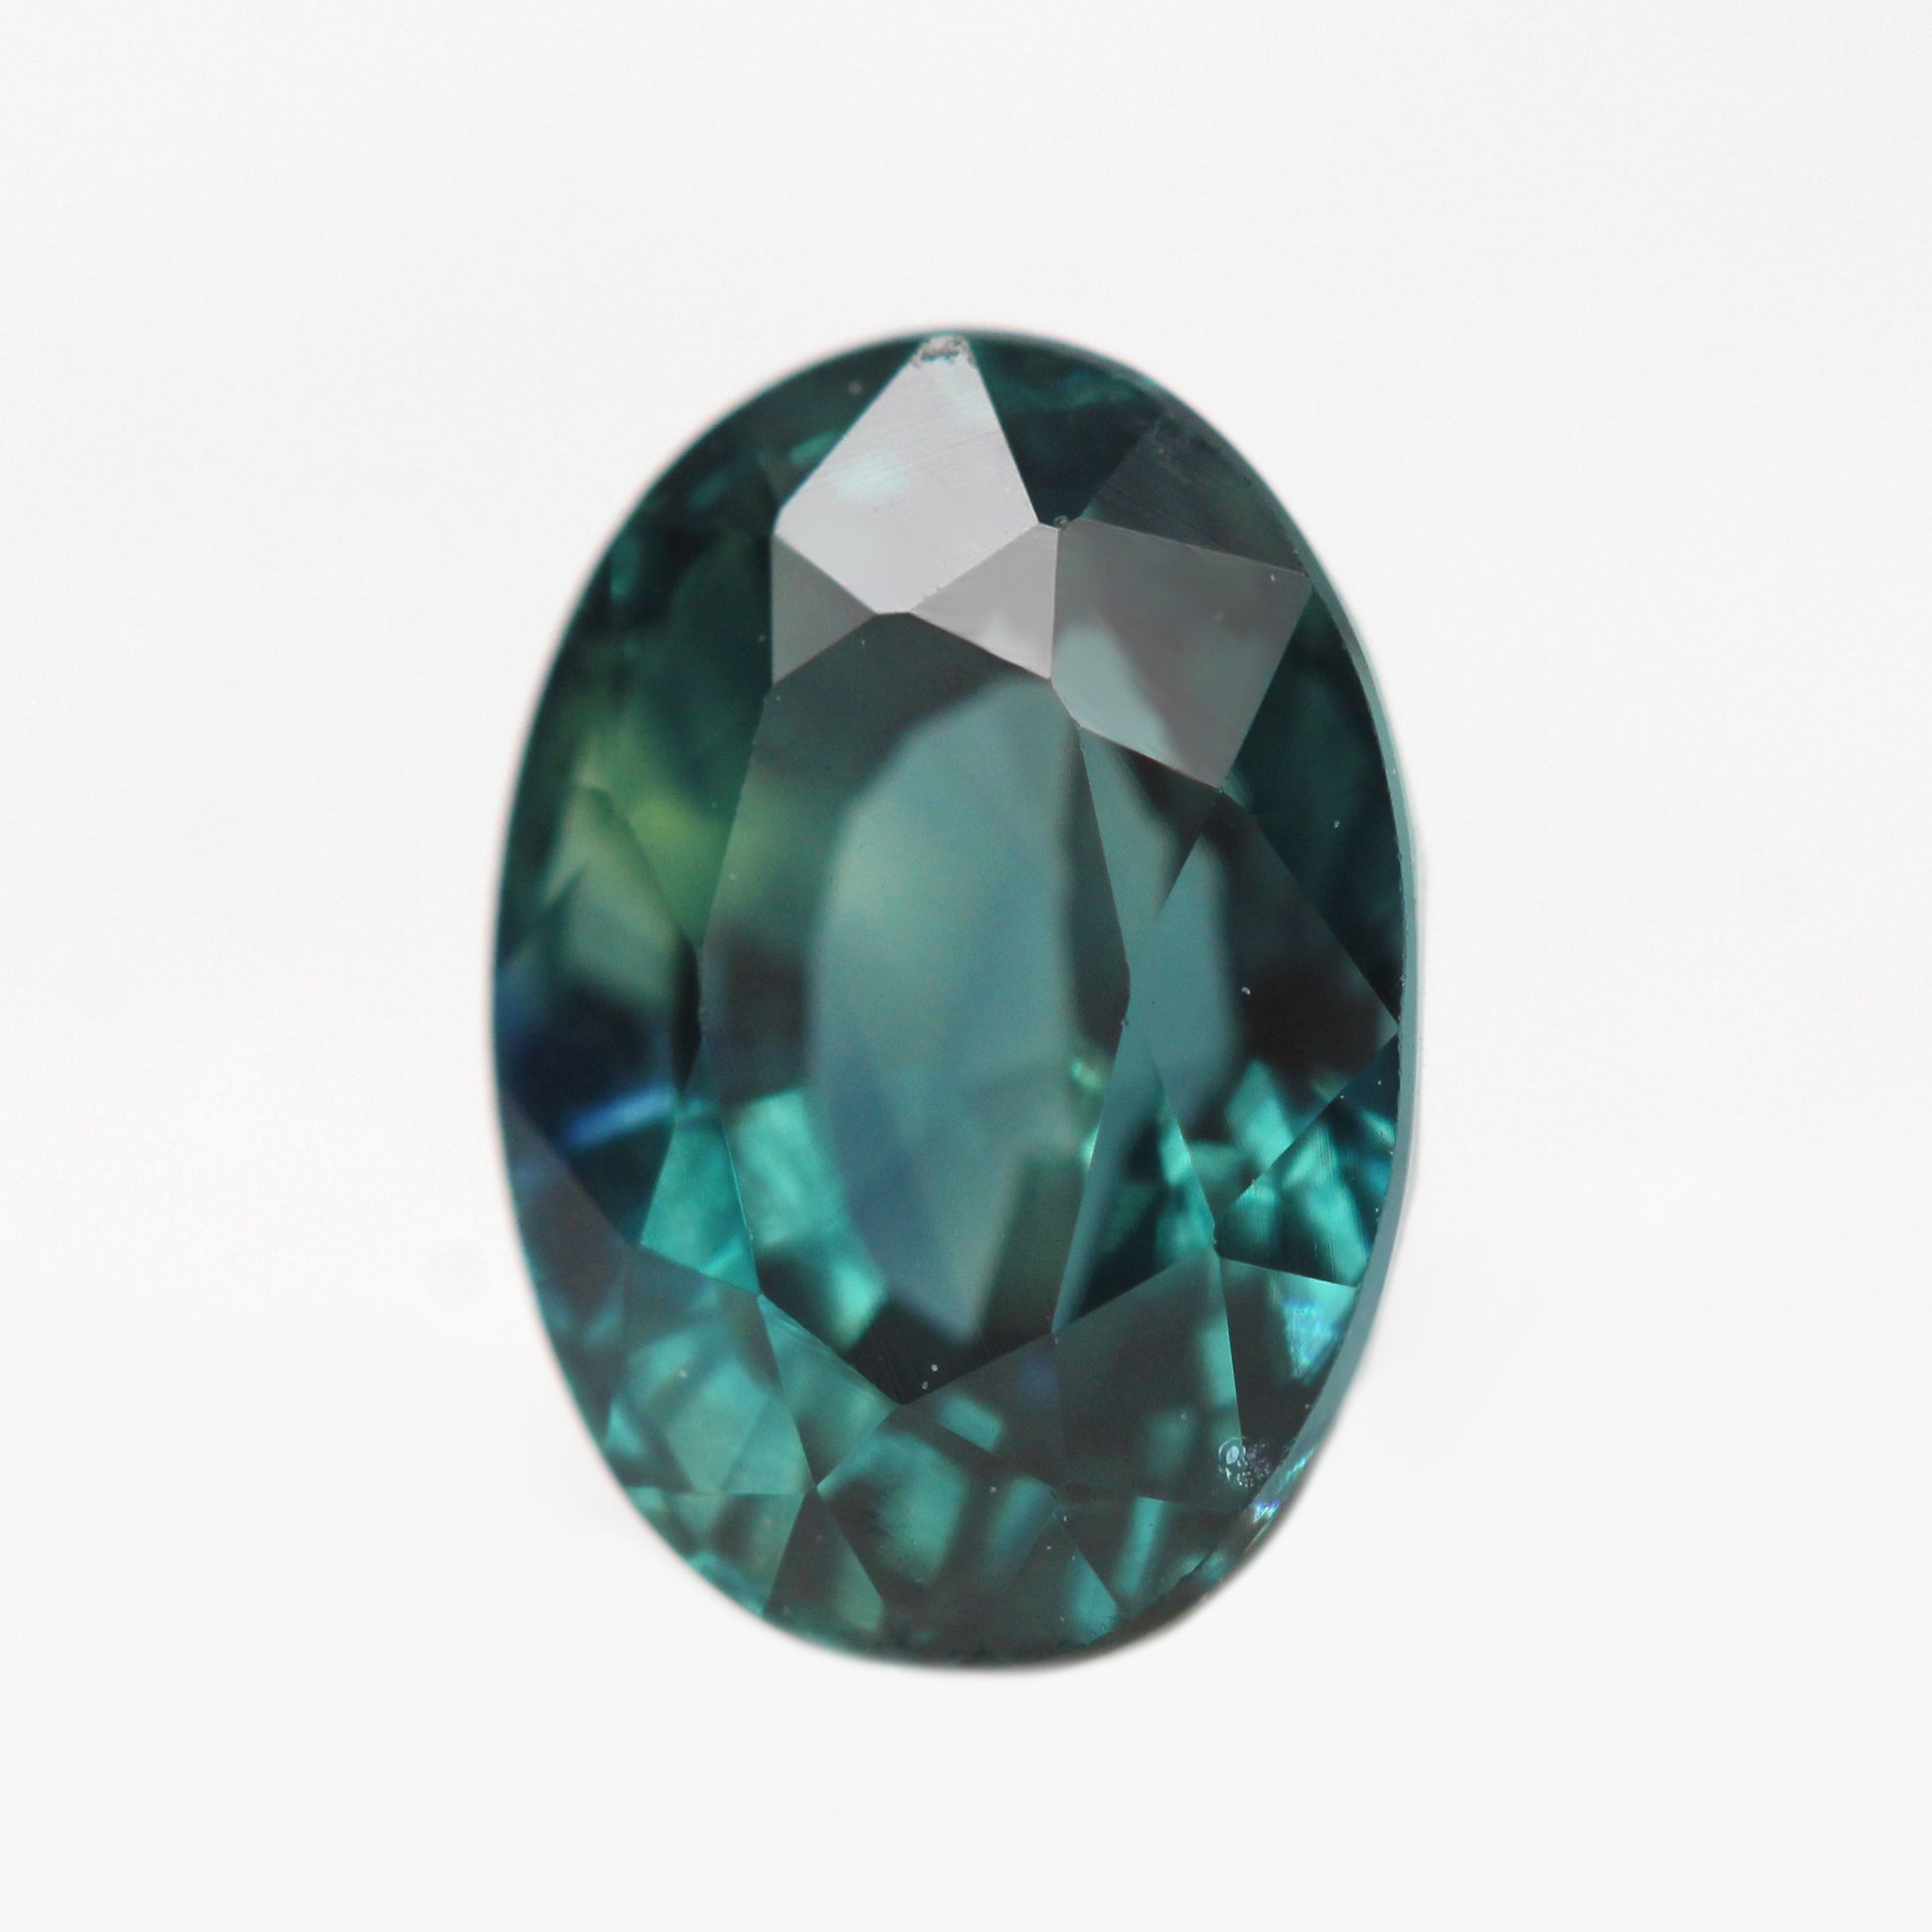 1.47 Carat Oval Teal Madagascar Sapphire for Custom Work - Inventory Code TOS147 - Midwinter Co. Alternative Bridal Rings and Modern Fine Jewelry